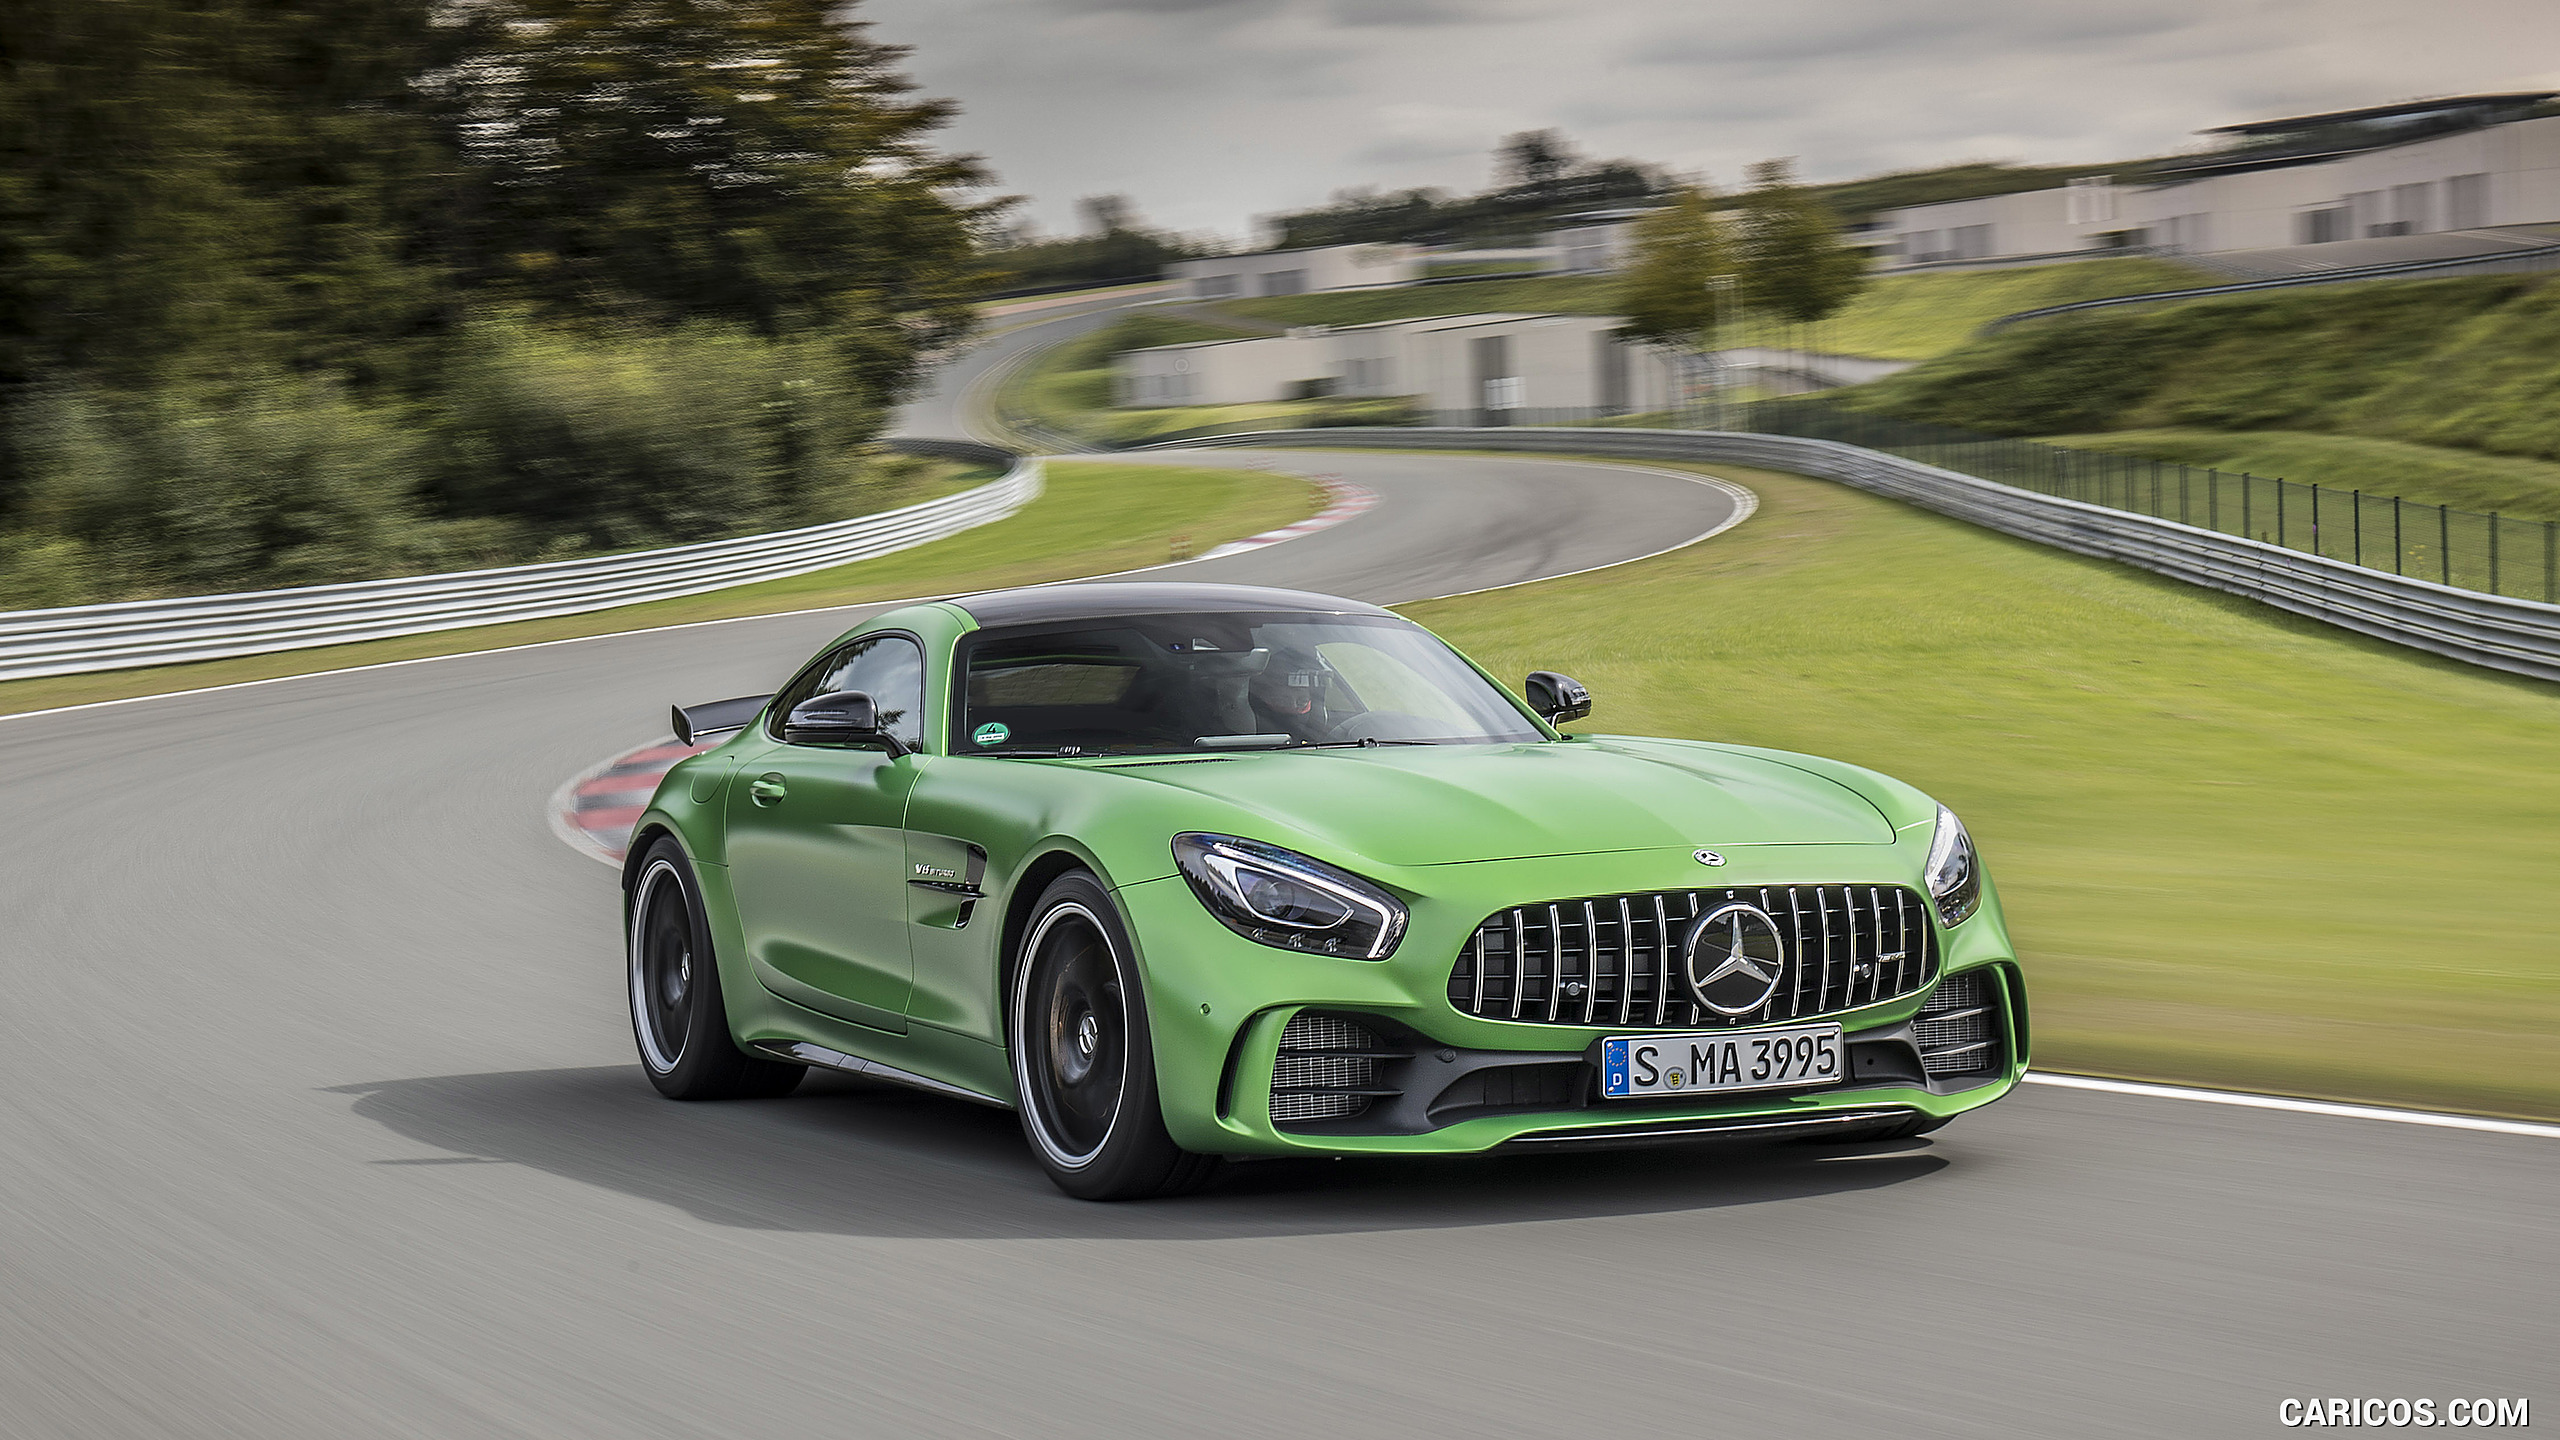 2017 Mercedes-AMG GT R Coupe - Front Three-Quarter, #160 of 182